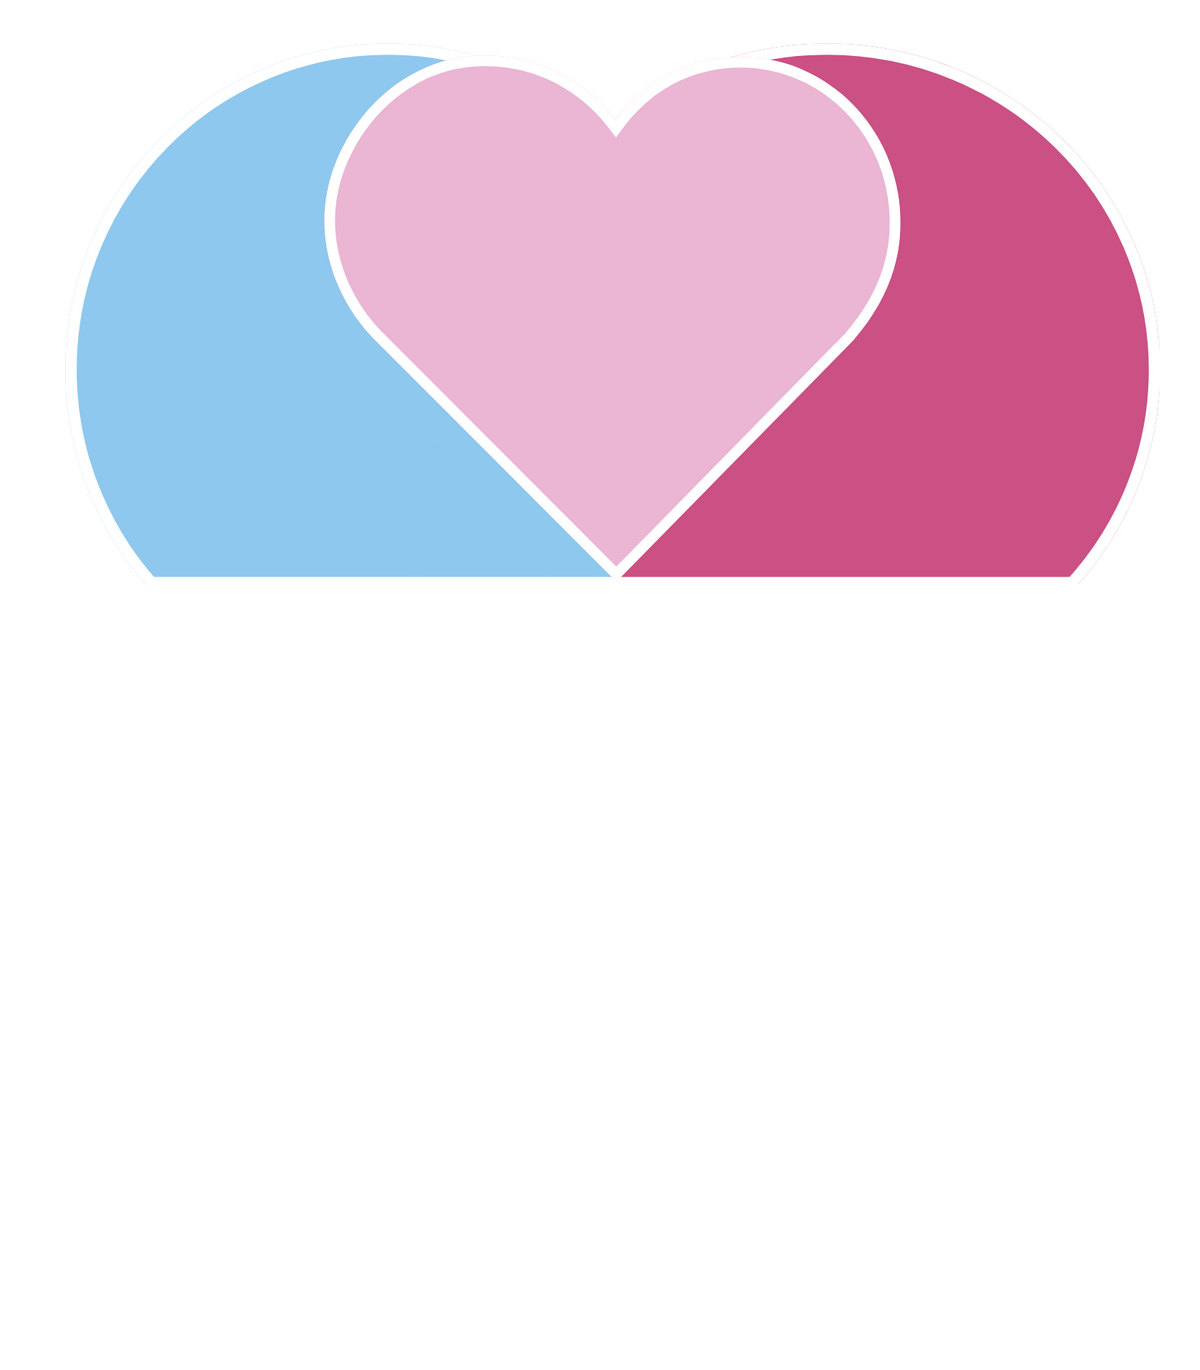 Heart resembling the logo of The Promise Scotland held up by two columns.